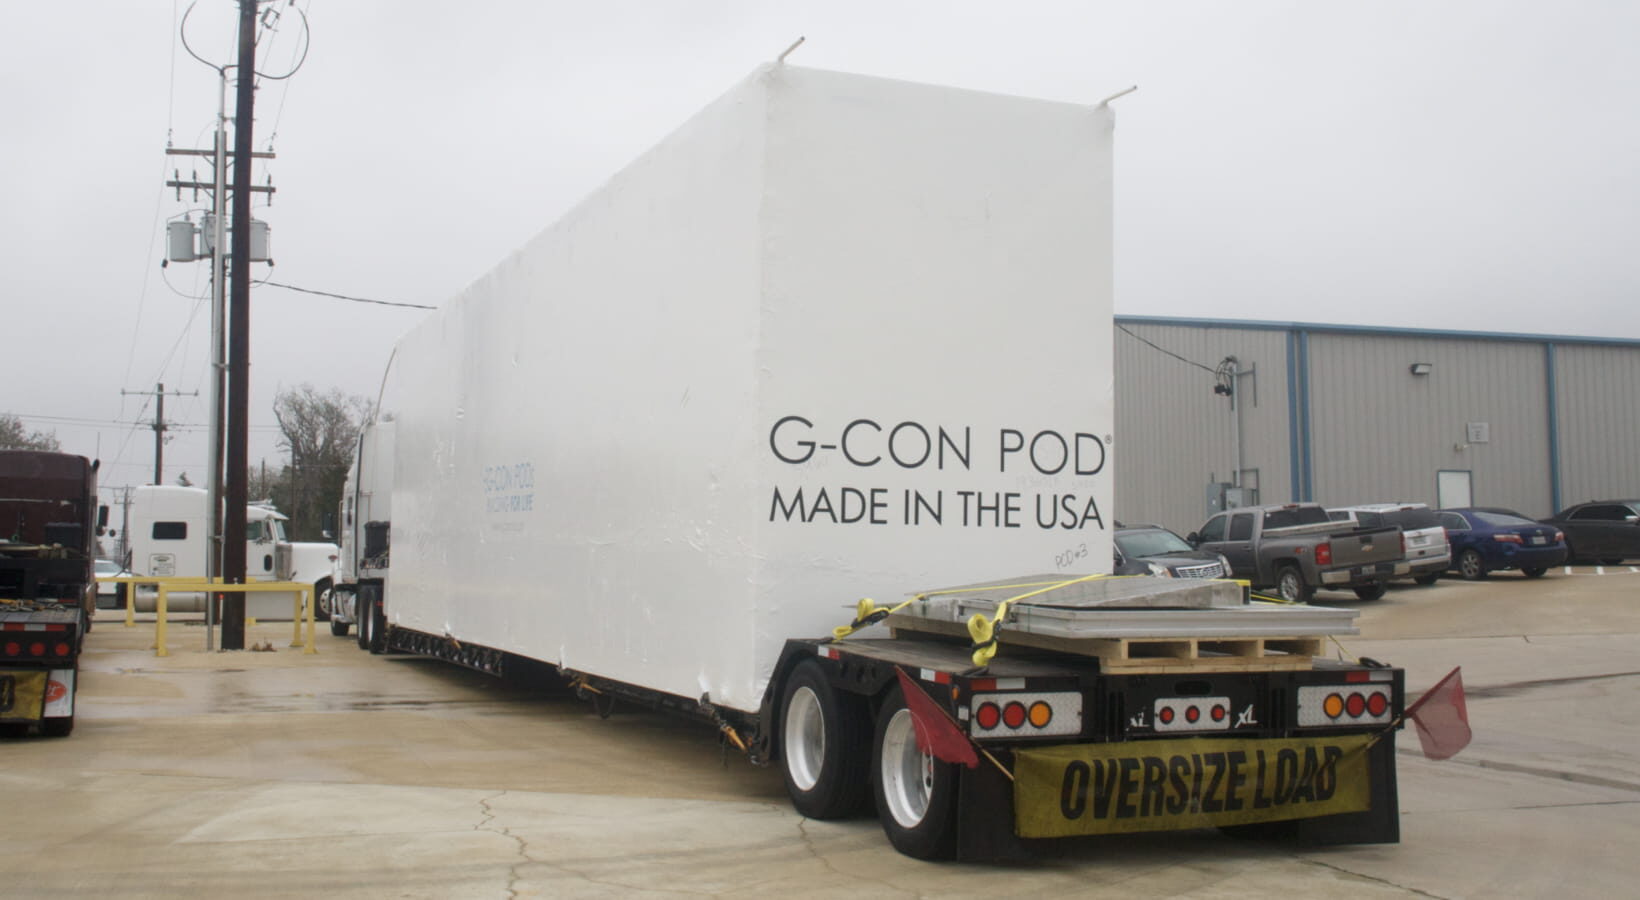 A POD loaded outdoors and ready for transport.